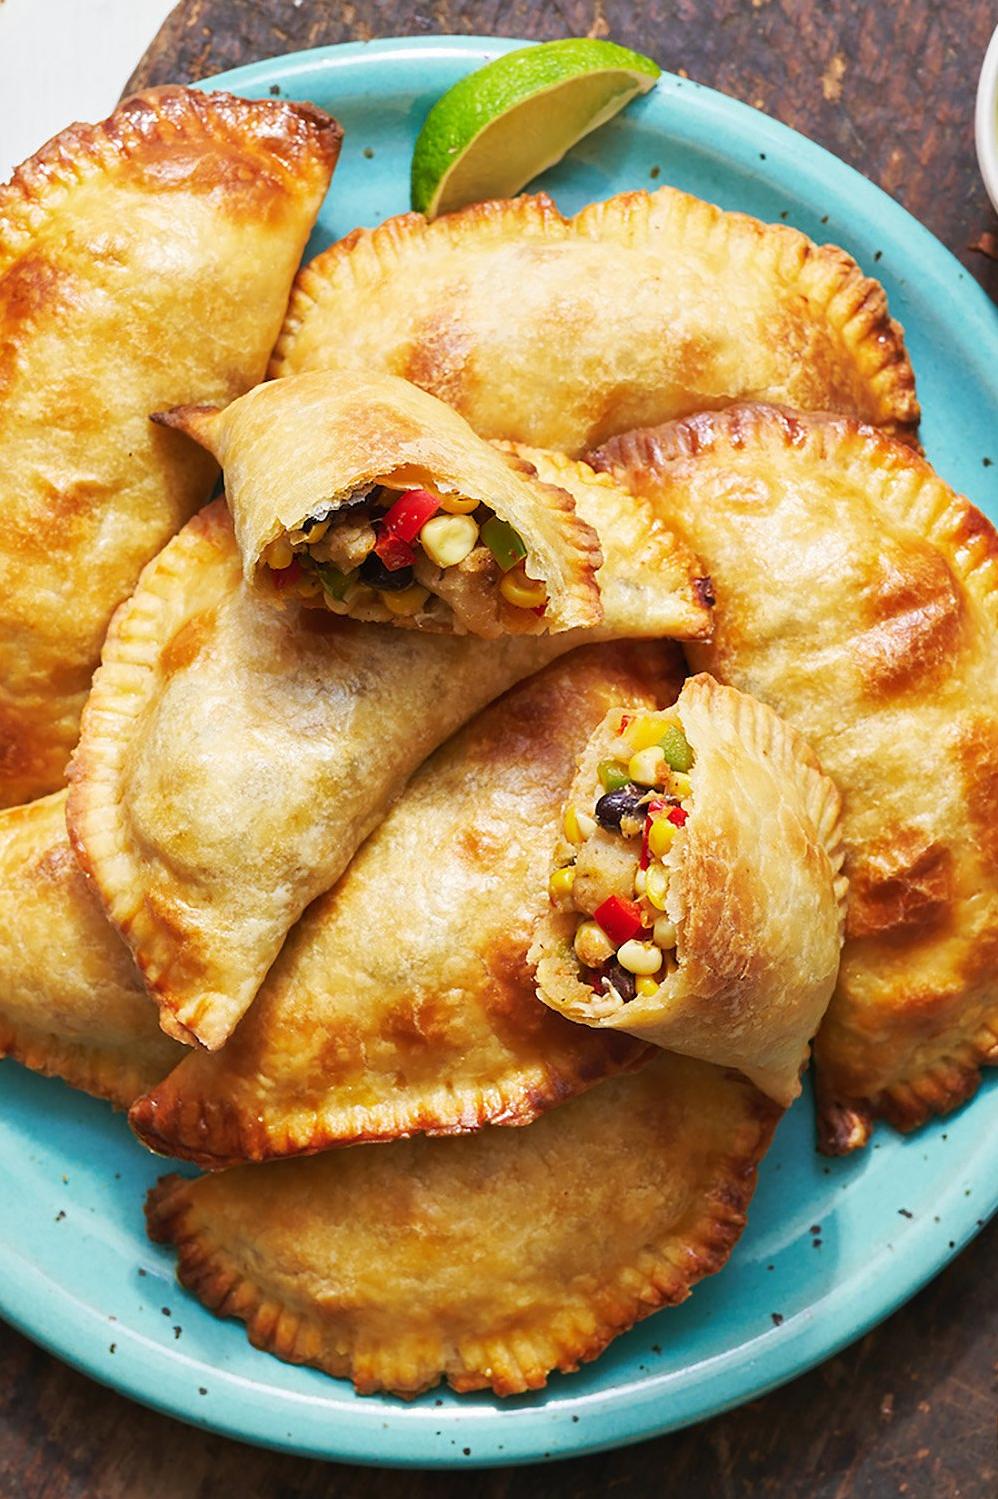  Your friends and family will be impressed with your game-day snack skills when you serve up these empanadas.